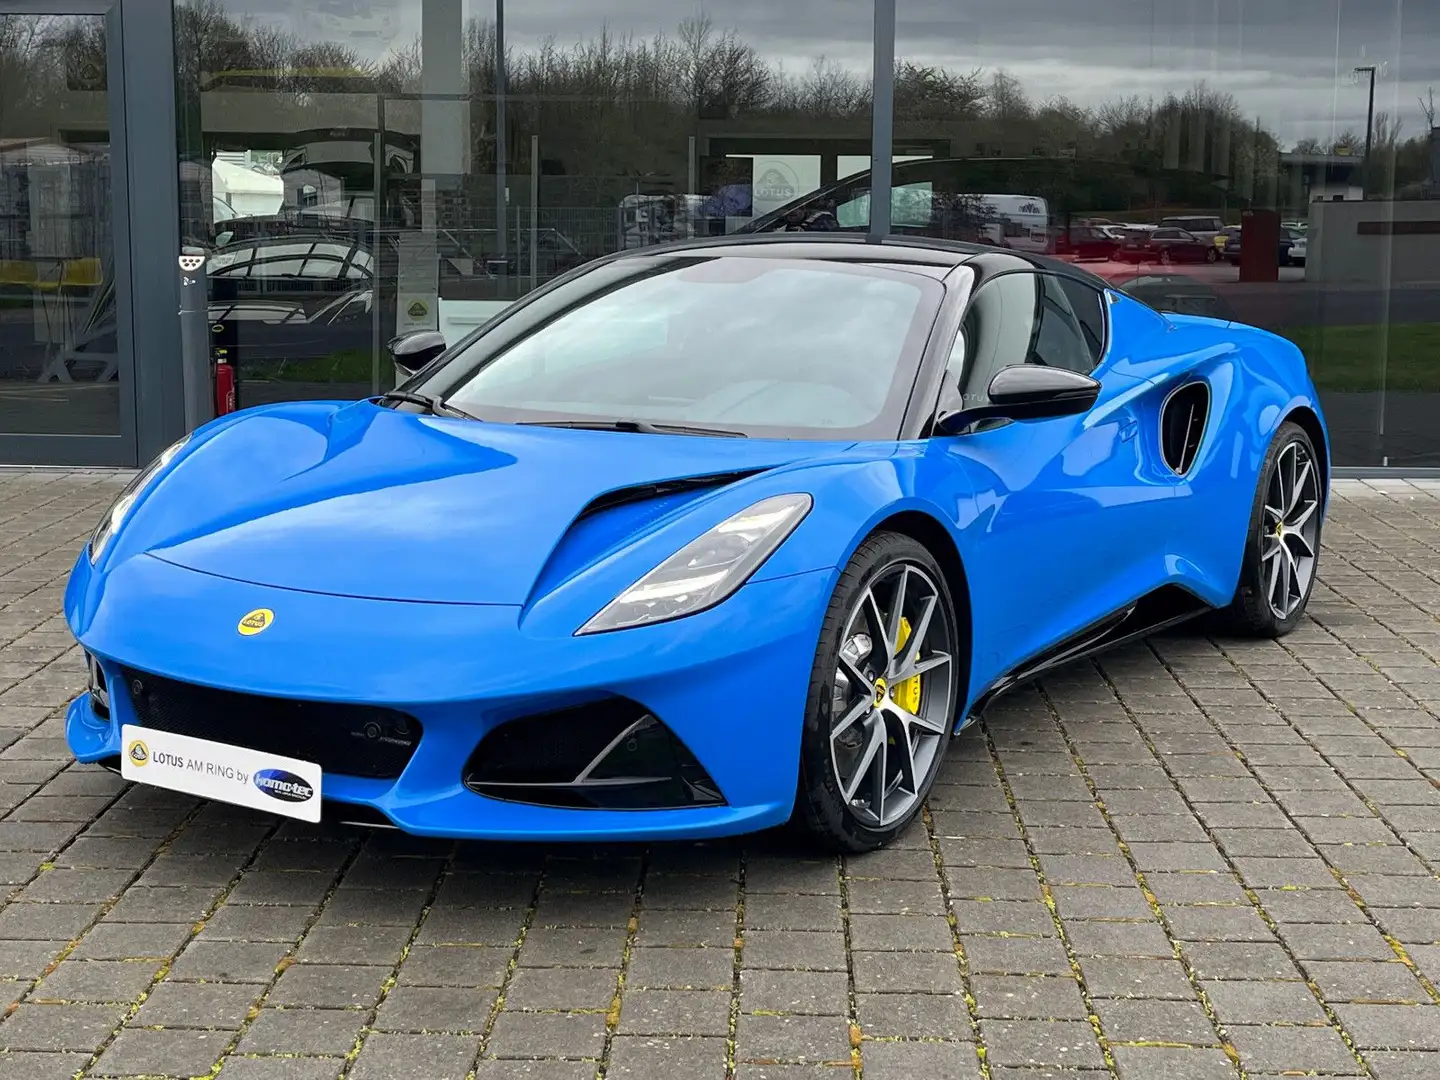 Lotus Emira I4 DCT "First Edition" by Lotus am Ring Azul - 1